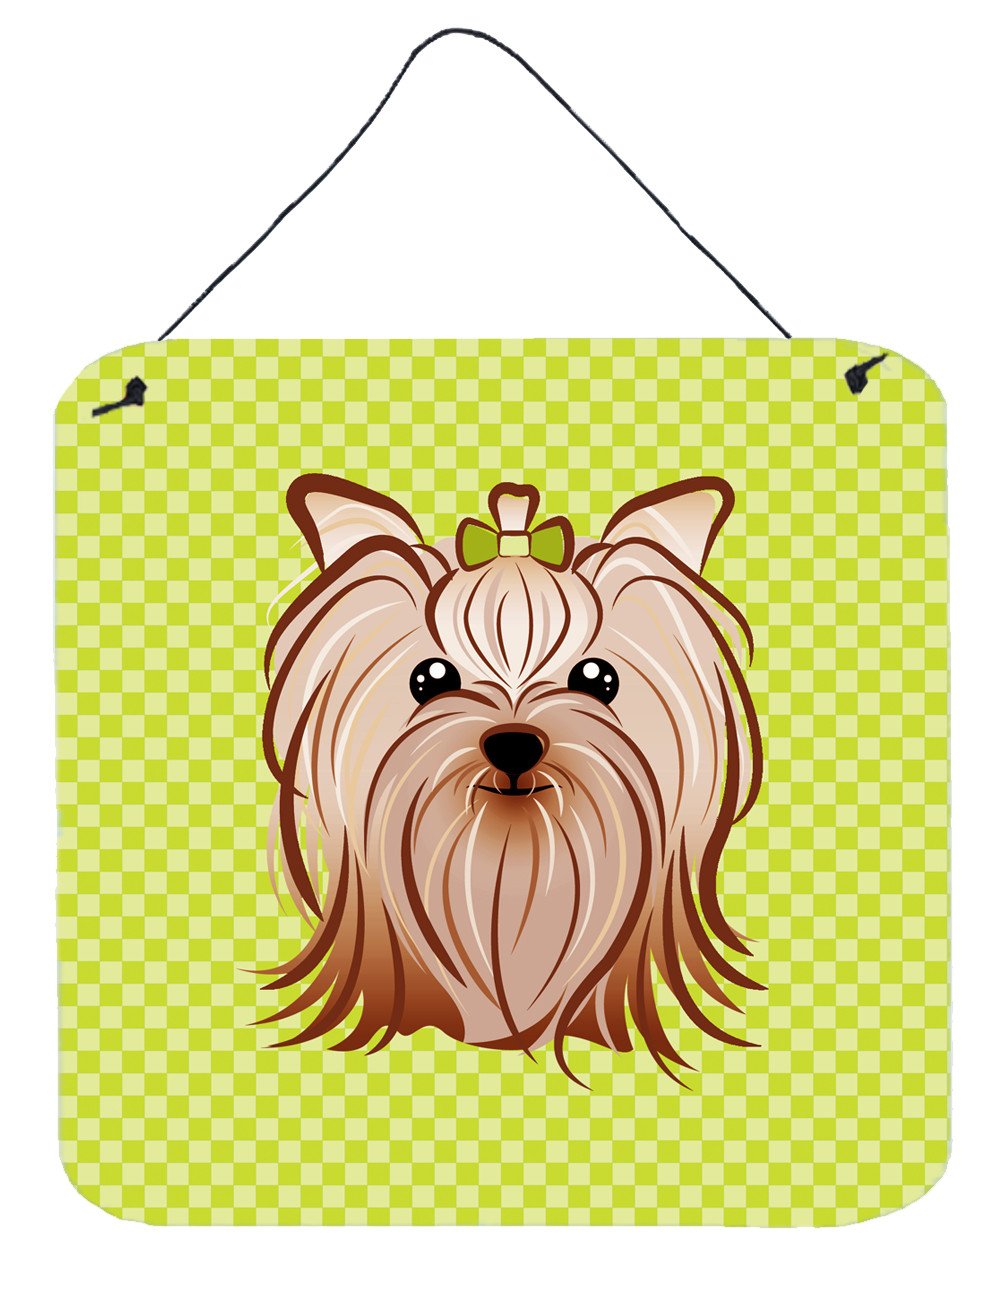 Checkerboard Lime Green Yorkie Yorkshire Terrier Wall or Door Hanging Prints BB1266DS66 by Caroline's Treasures